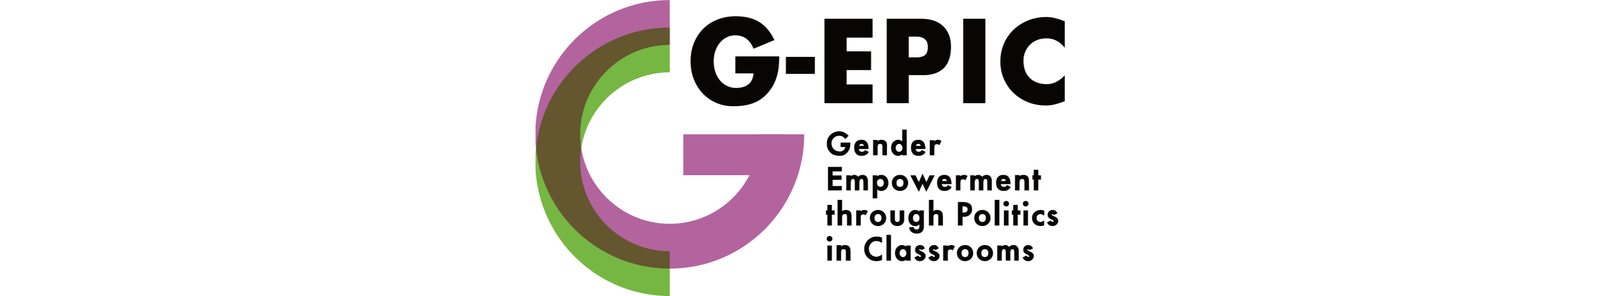 gepic-banner.png